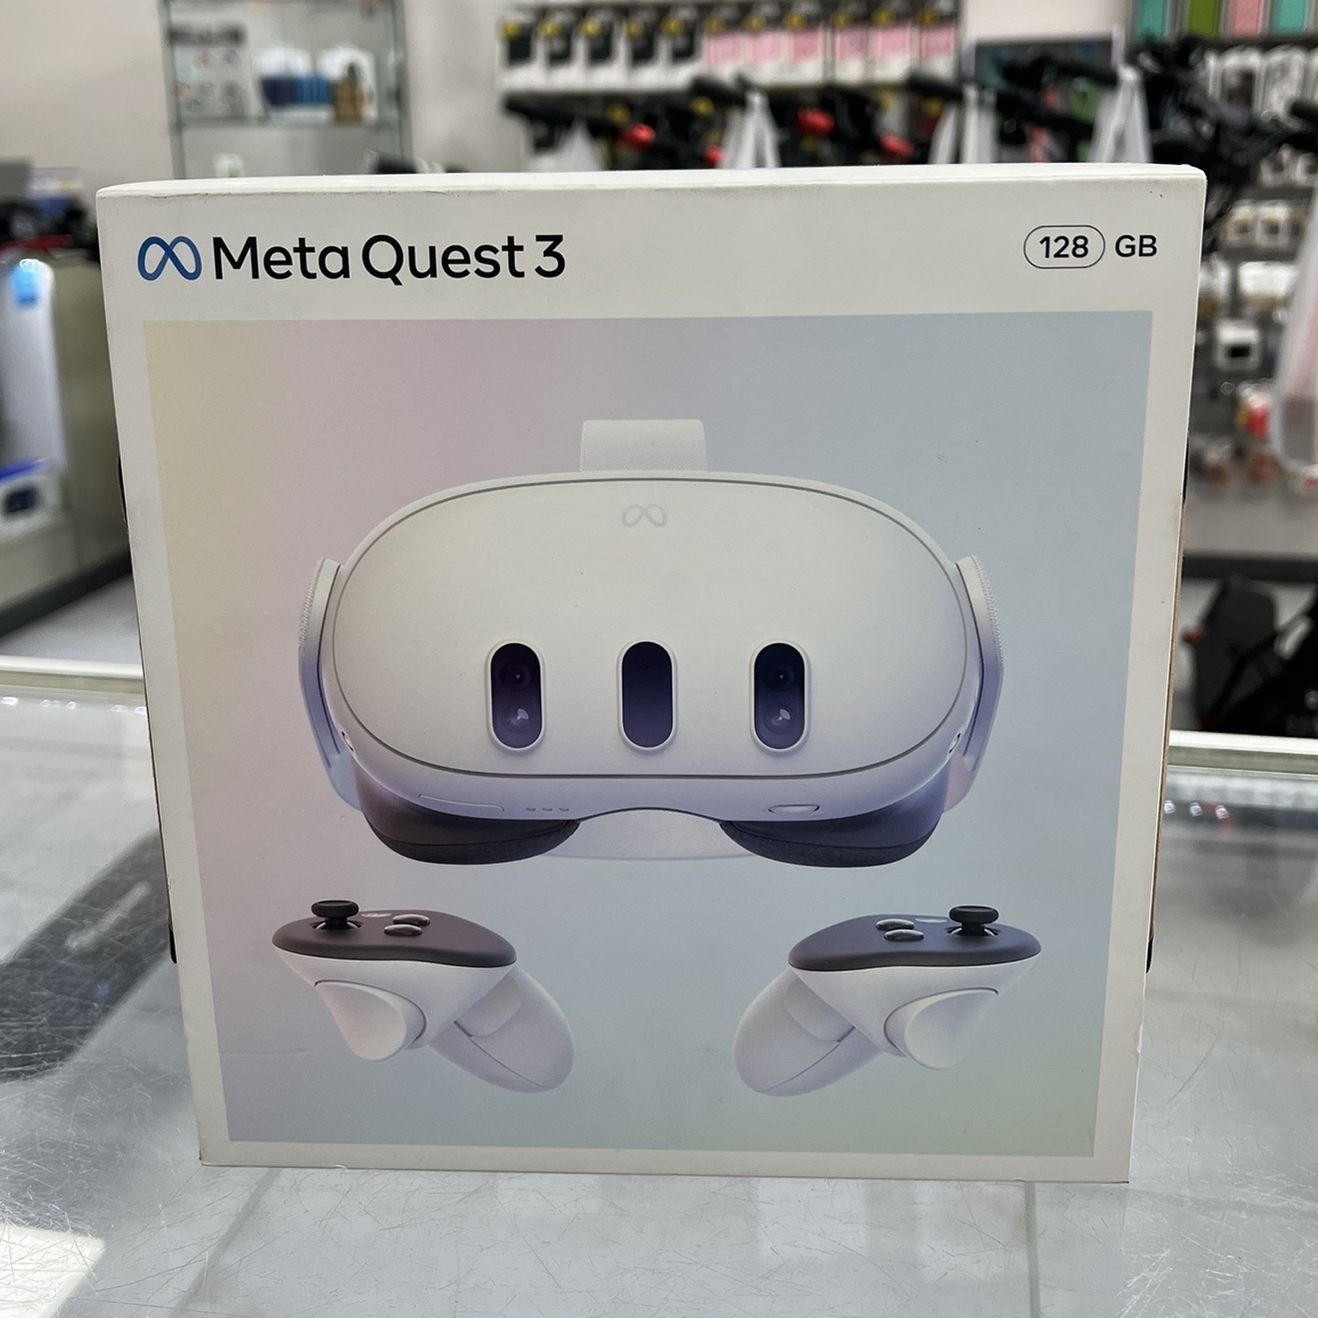 MetaQuest 3 128GB Brand New! Finance For $50 Down Payment!!